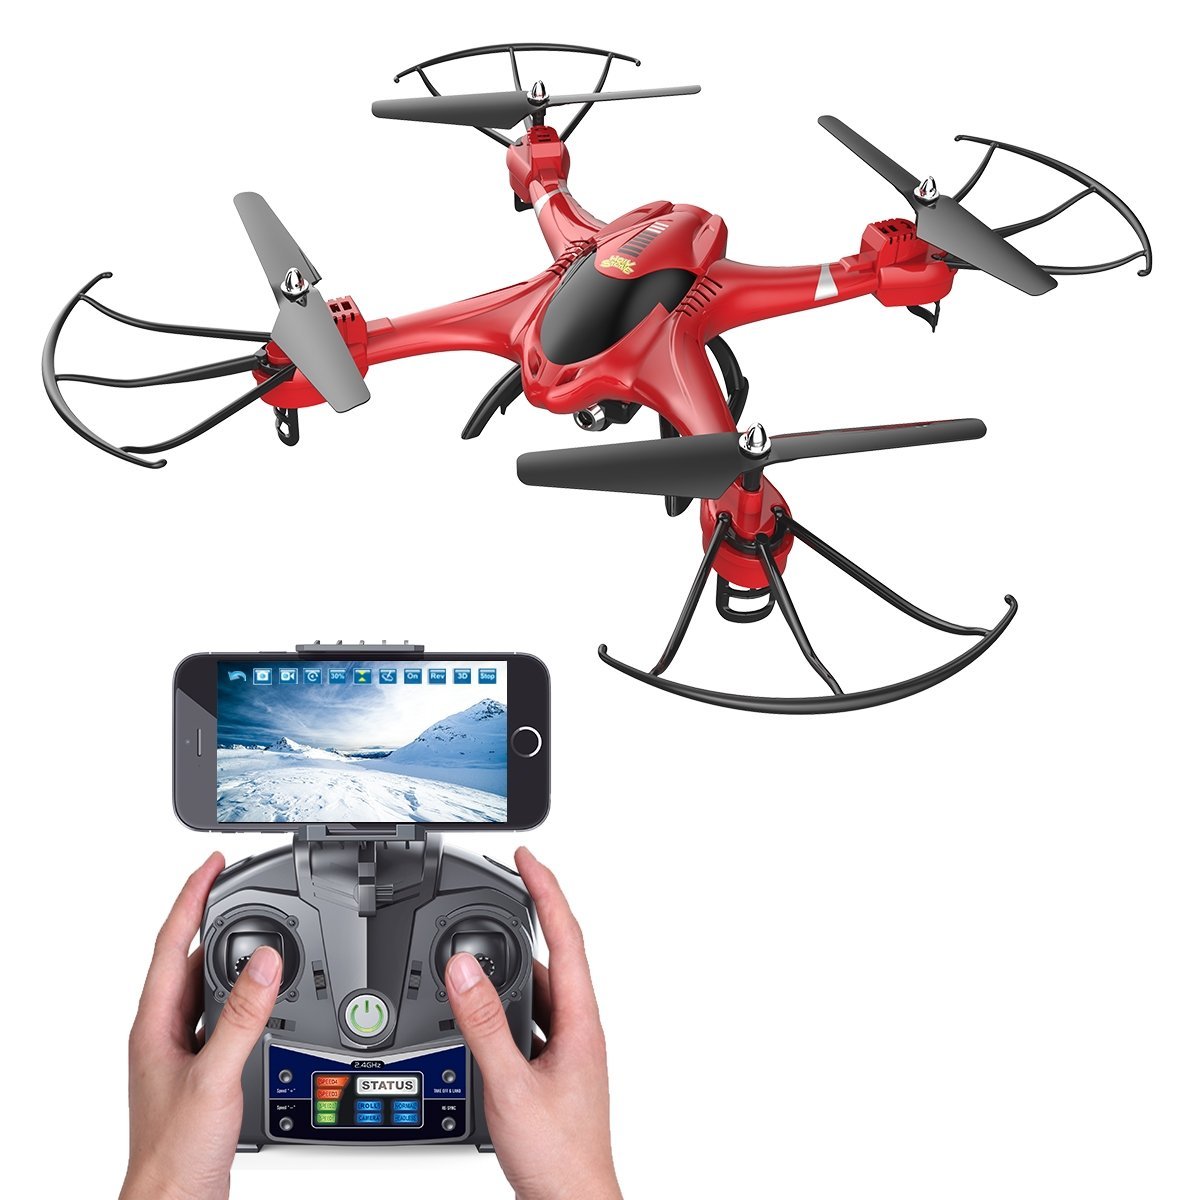 2 Batteries 3D Flip One Key Function Holy Stone HS200 FPV Drone with Camera 720P HD Live Video for Adults & Kids RC Wifi Quadcopter with Voice/App Control Easy to Fly for Beginners Altitude Hold 